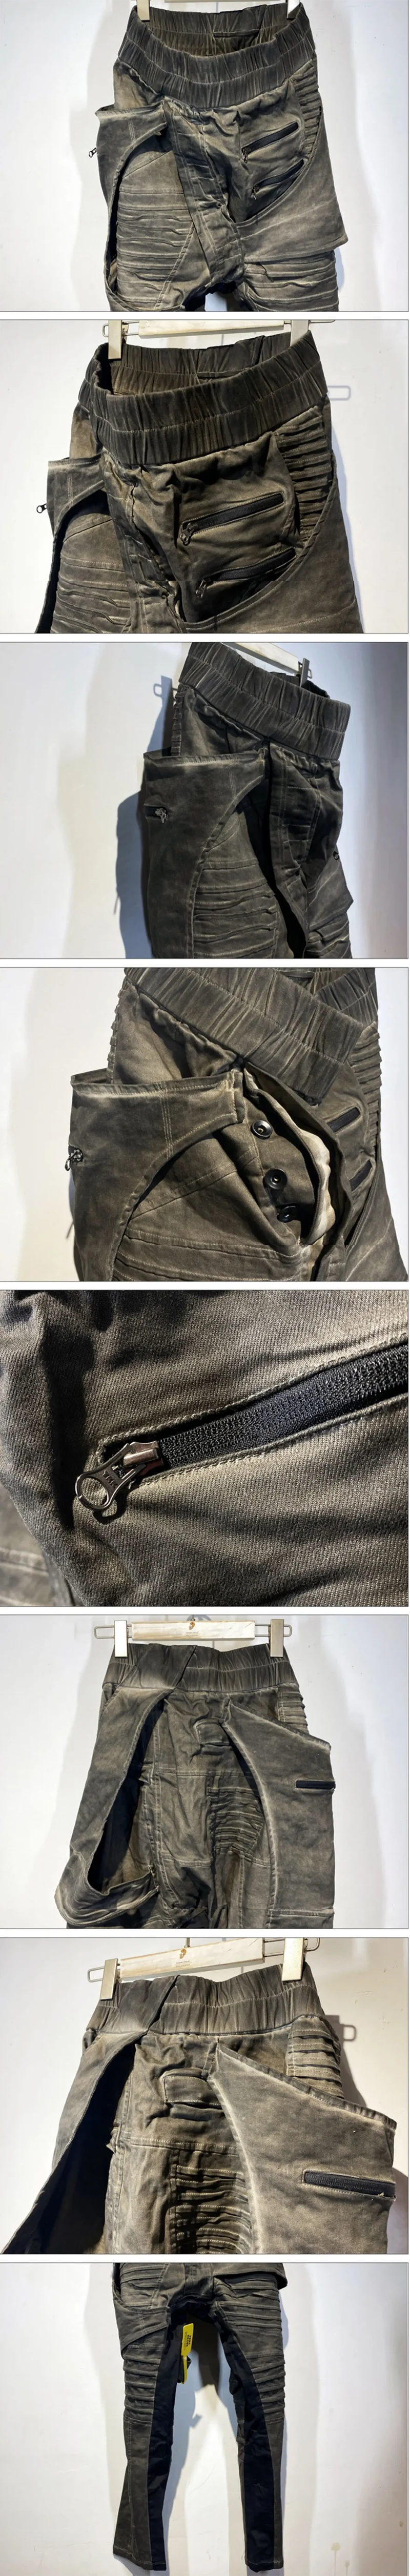 details of the Cyberpunk style pants "Hatsu" in dark olive